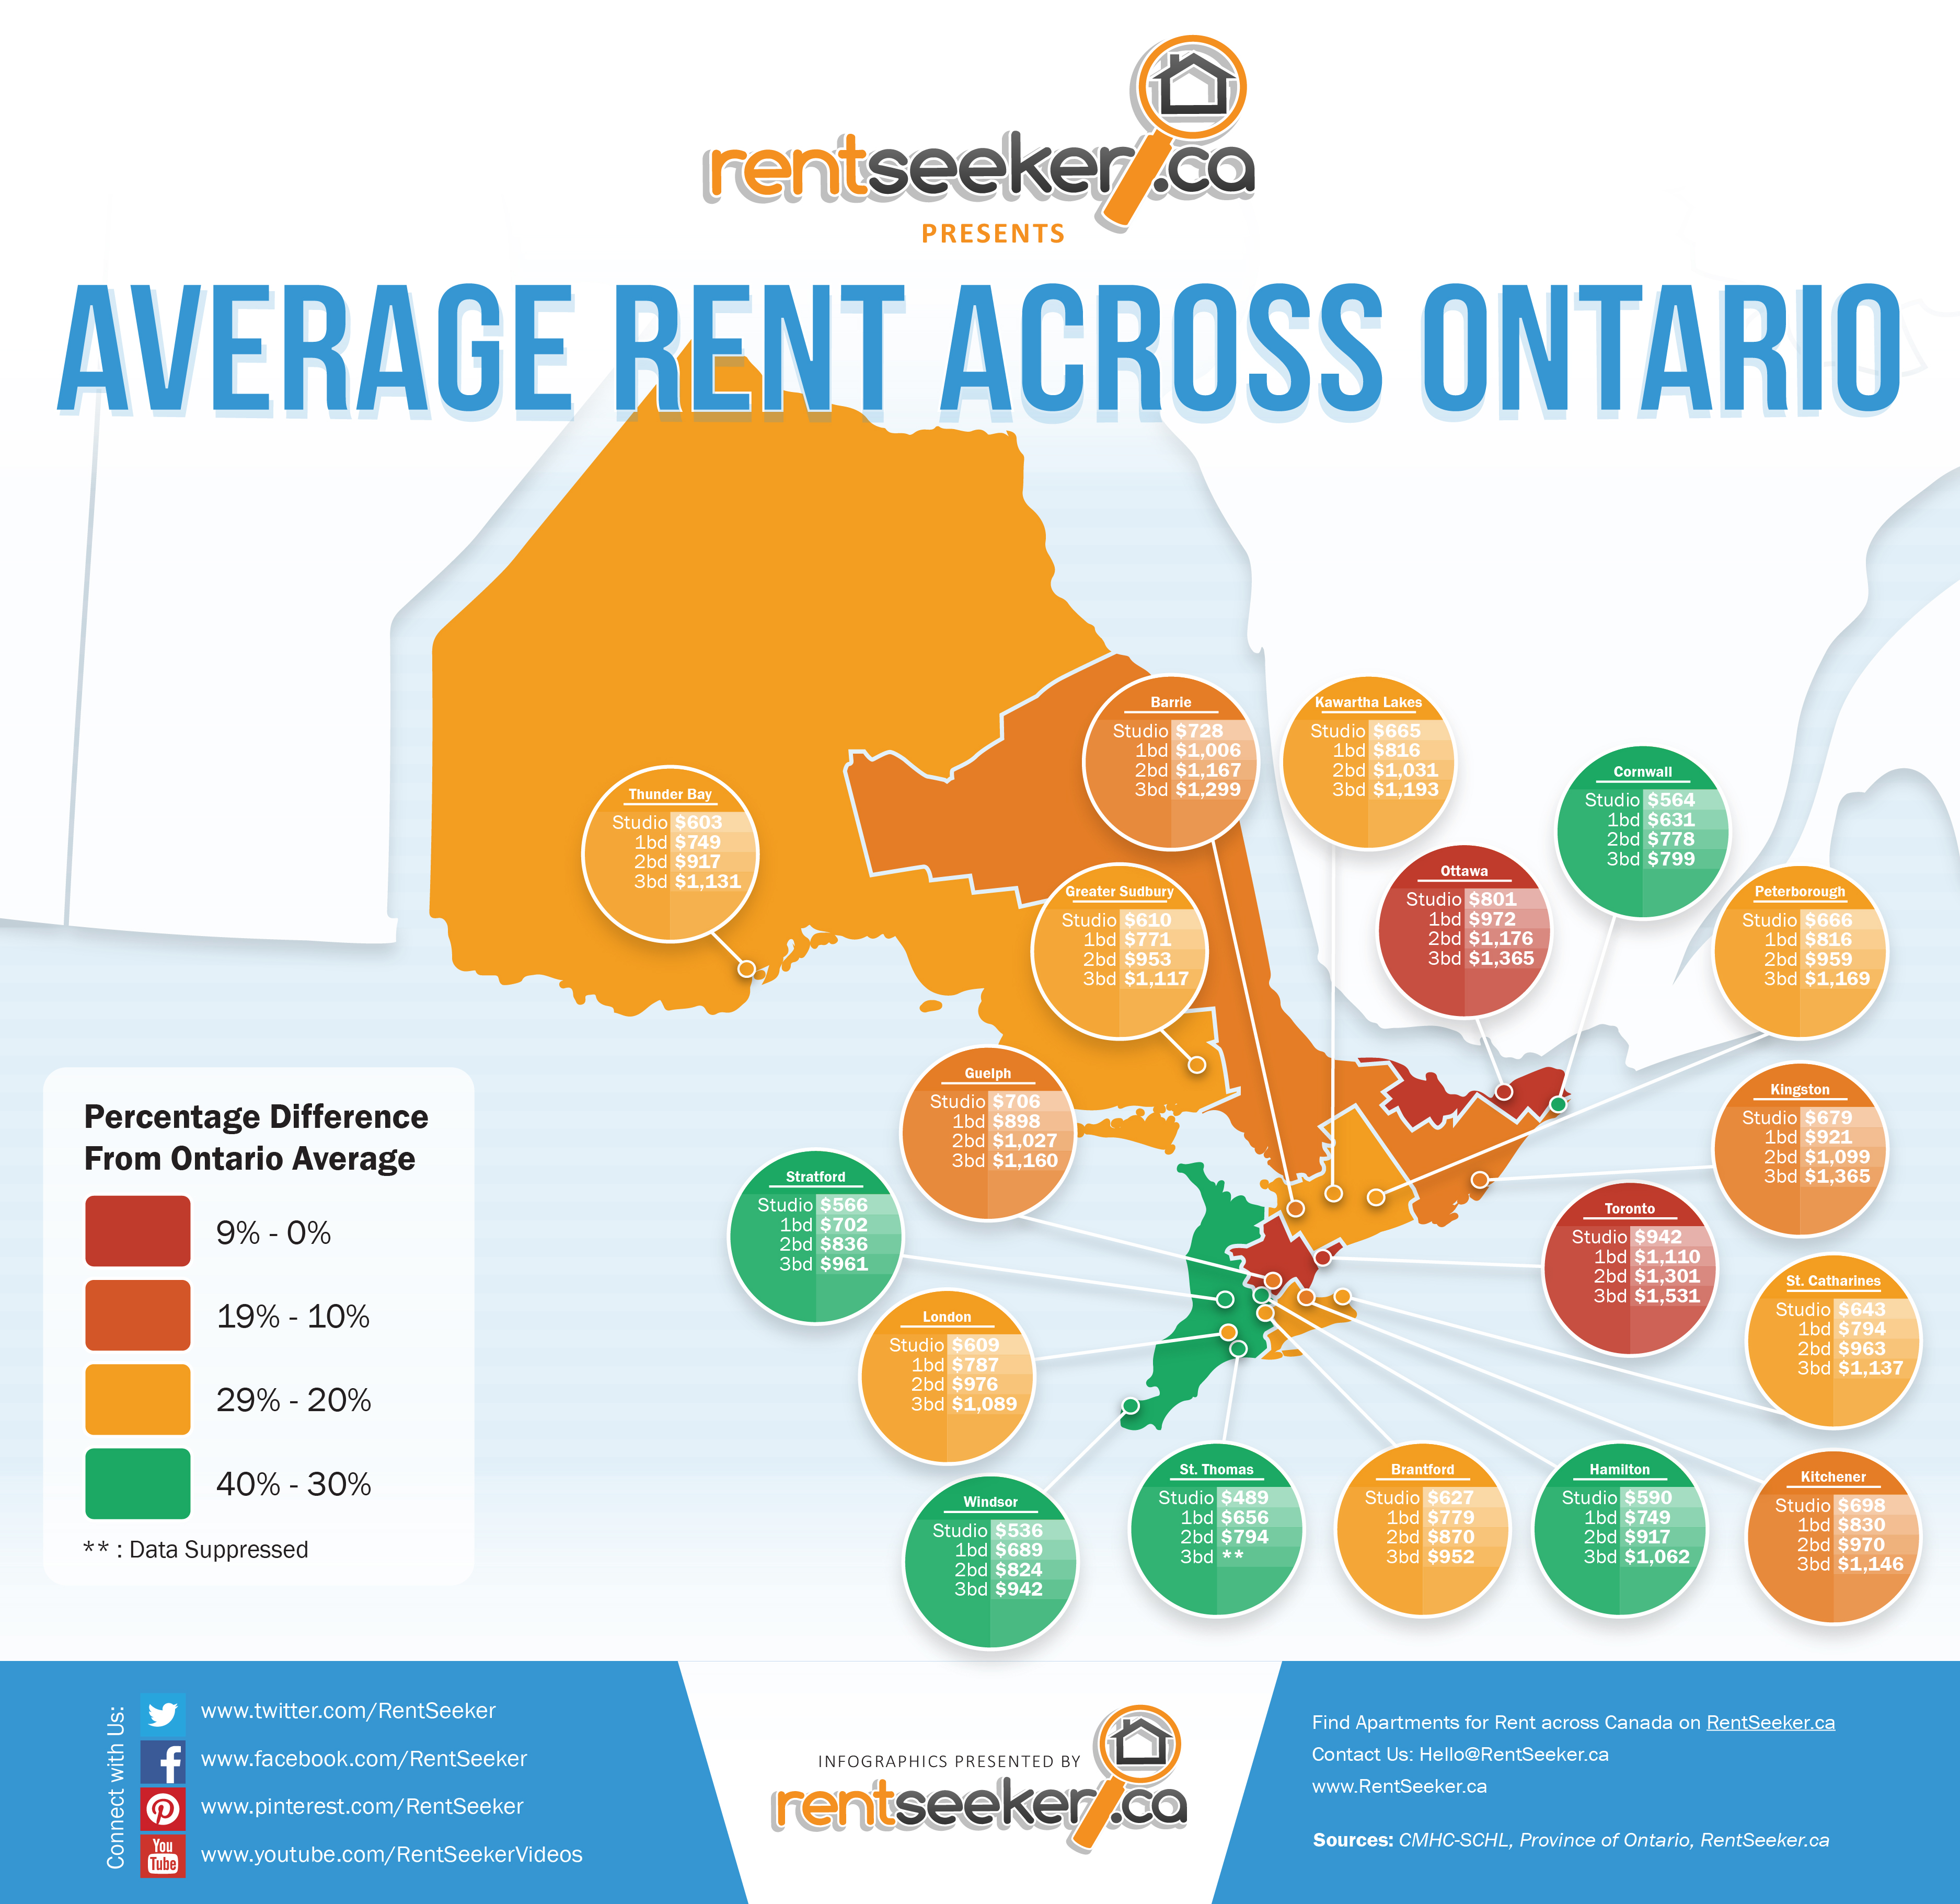 The Average Cost of Rent for Apartments, Condos and Homes across Ontario